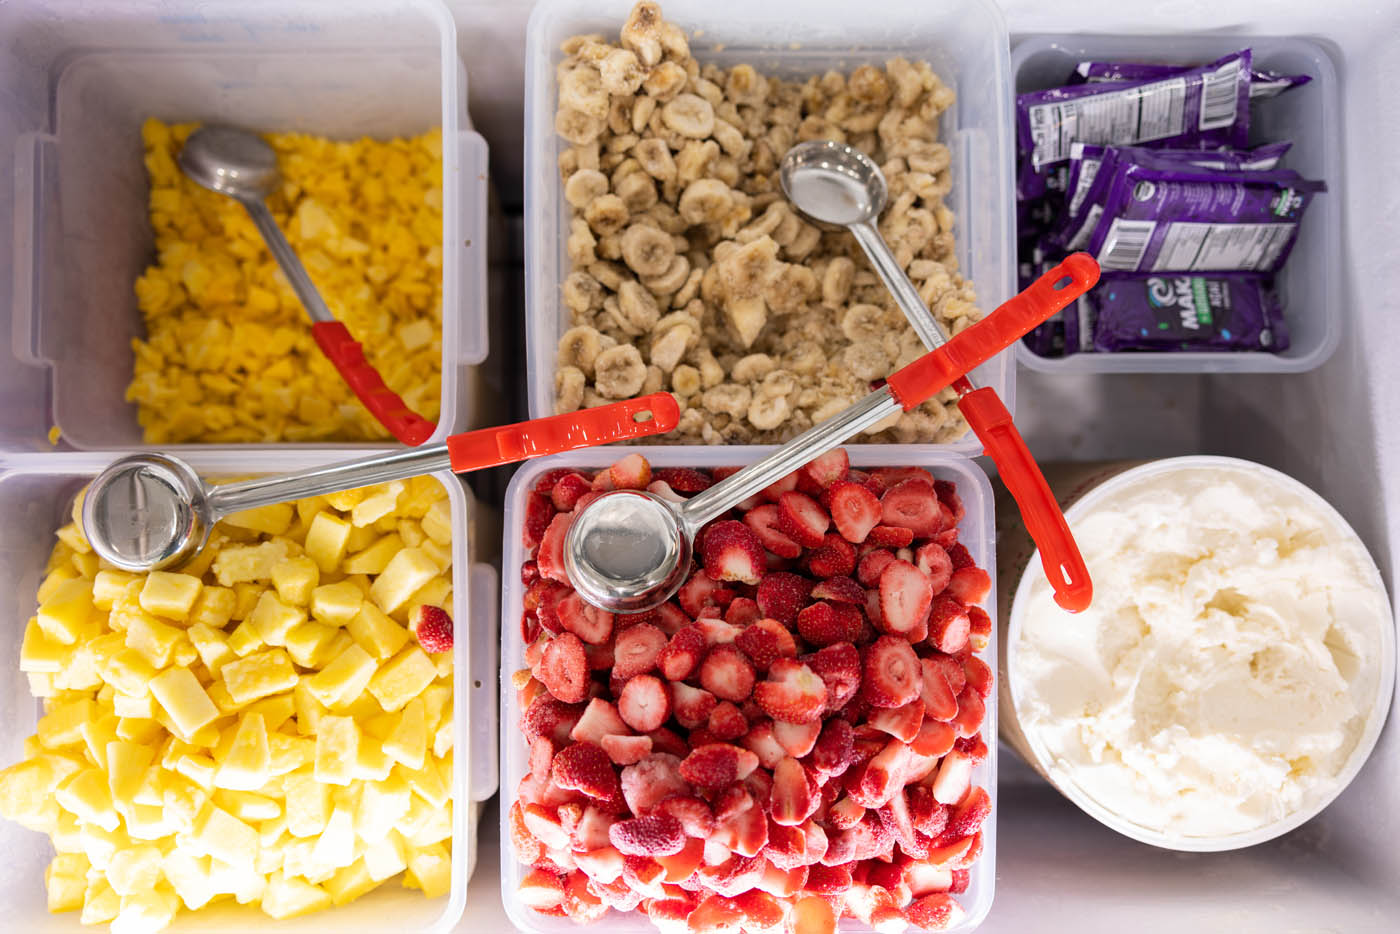 Strawberries, pineapple, bananas just look at all the amazing things you can put into your Rush Bowls meal!